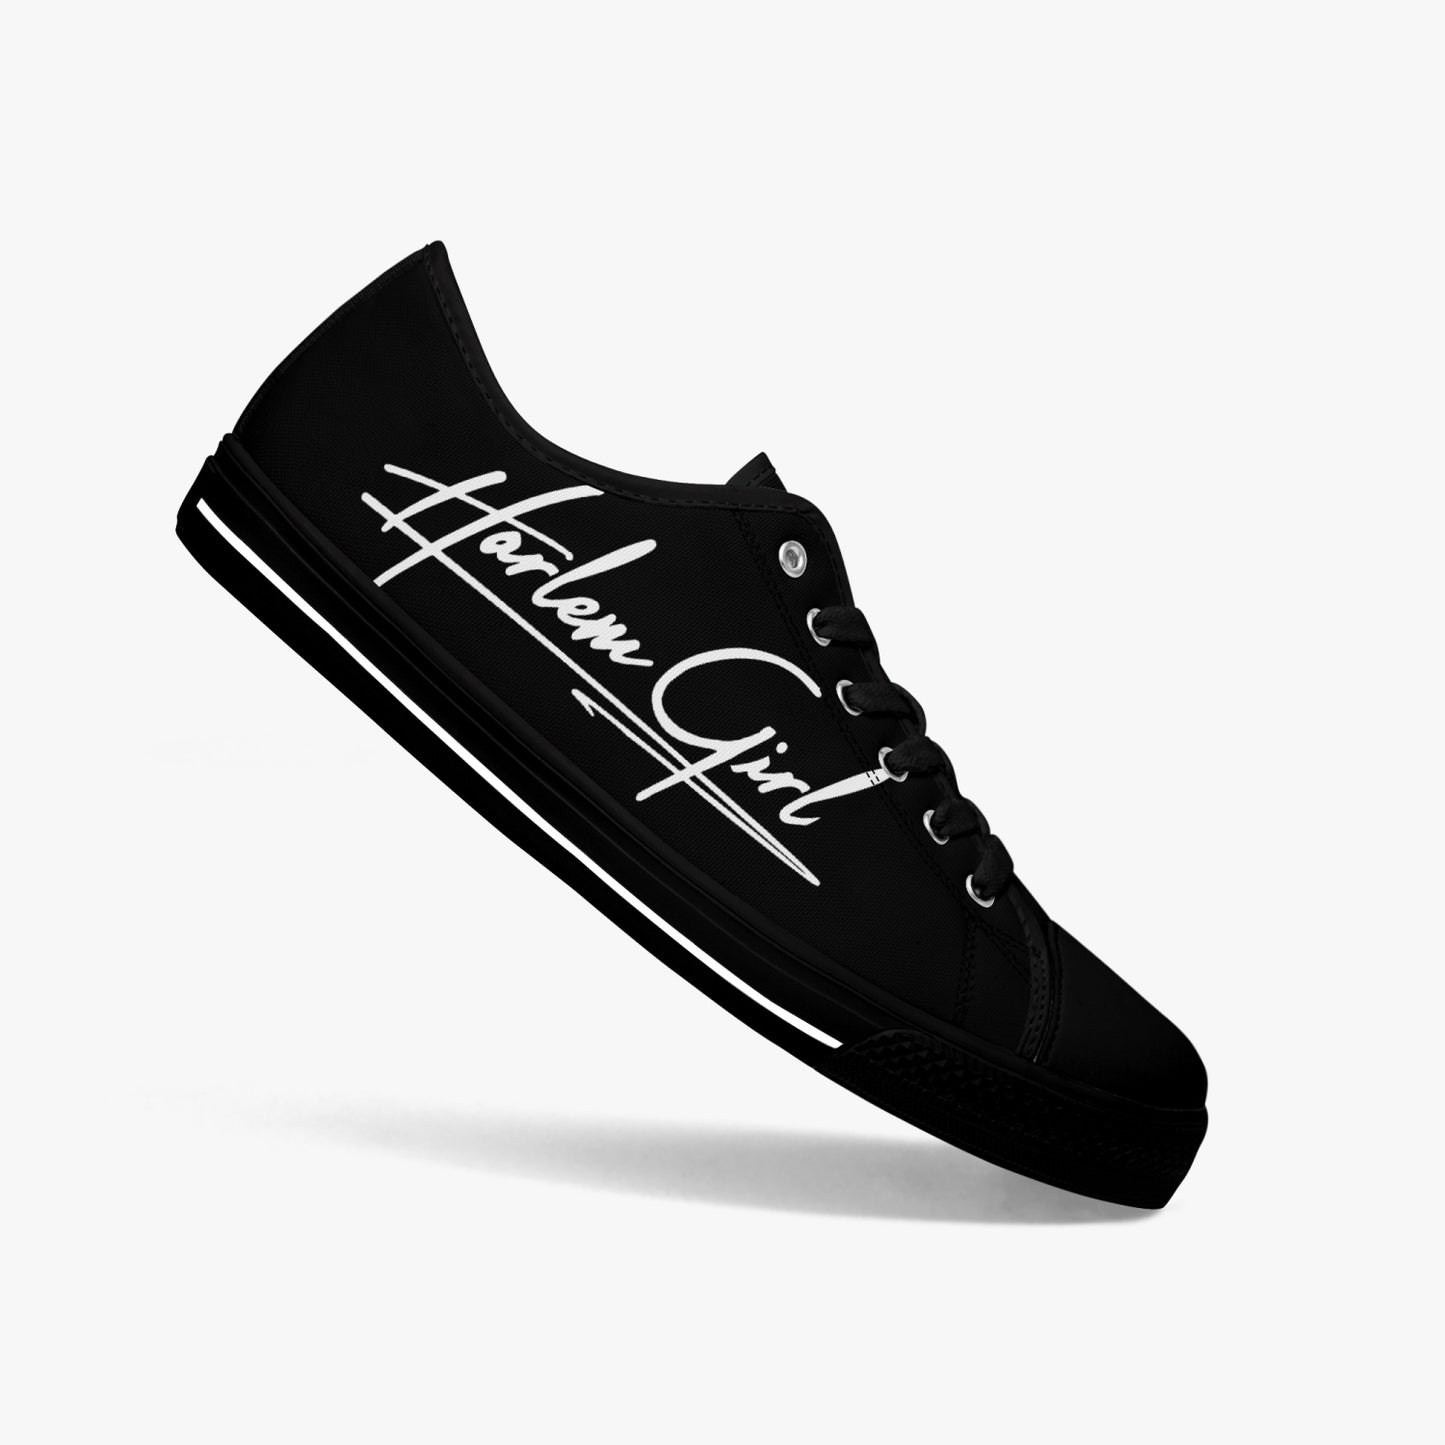 HB Harlem Girl "Lenox Ave" Classic Low Tops - Onyx - Women (Black or White Sole)